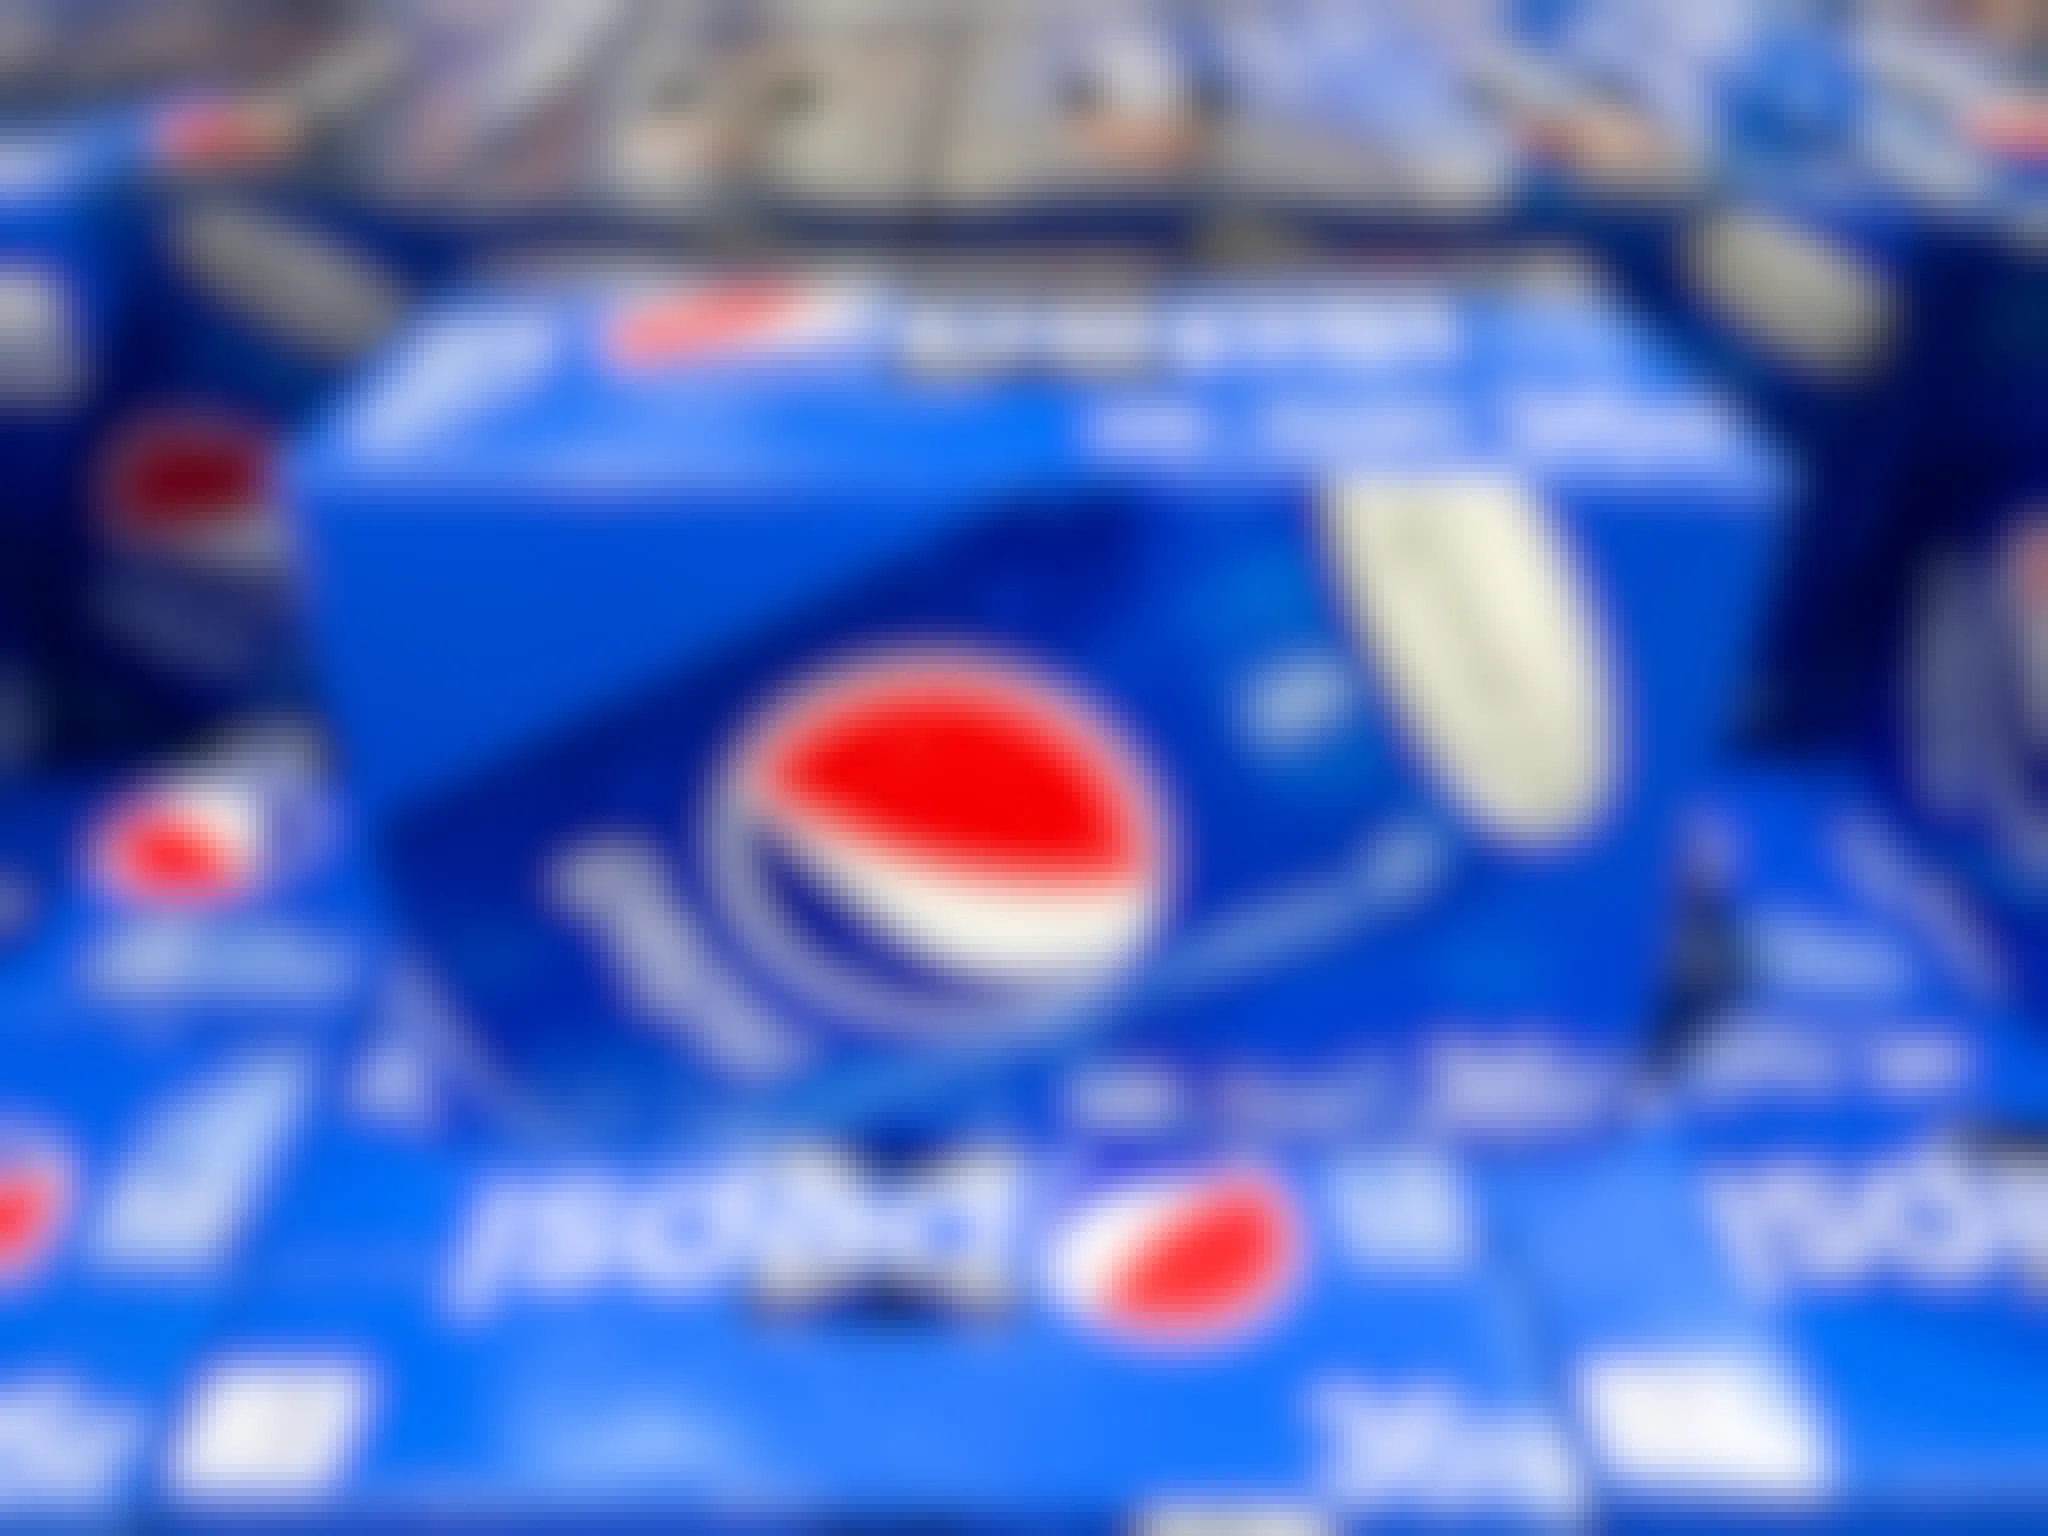 a box of pespi stacked on other boxes of pepsi